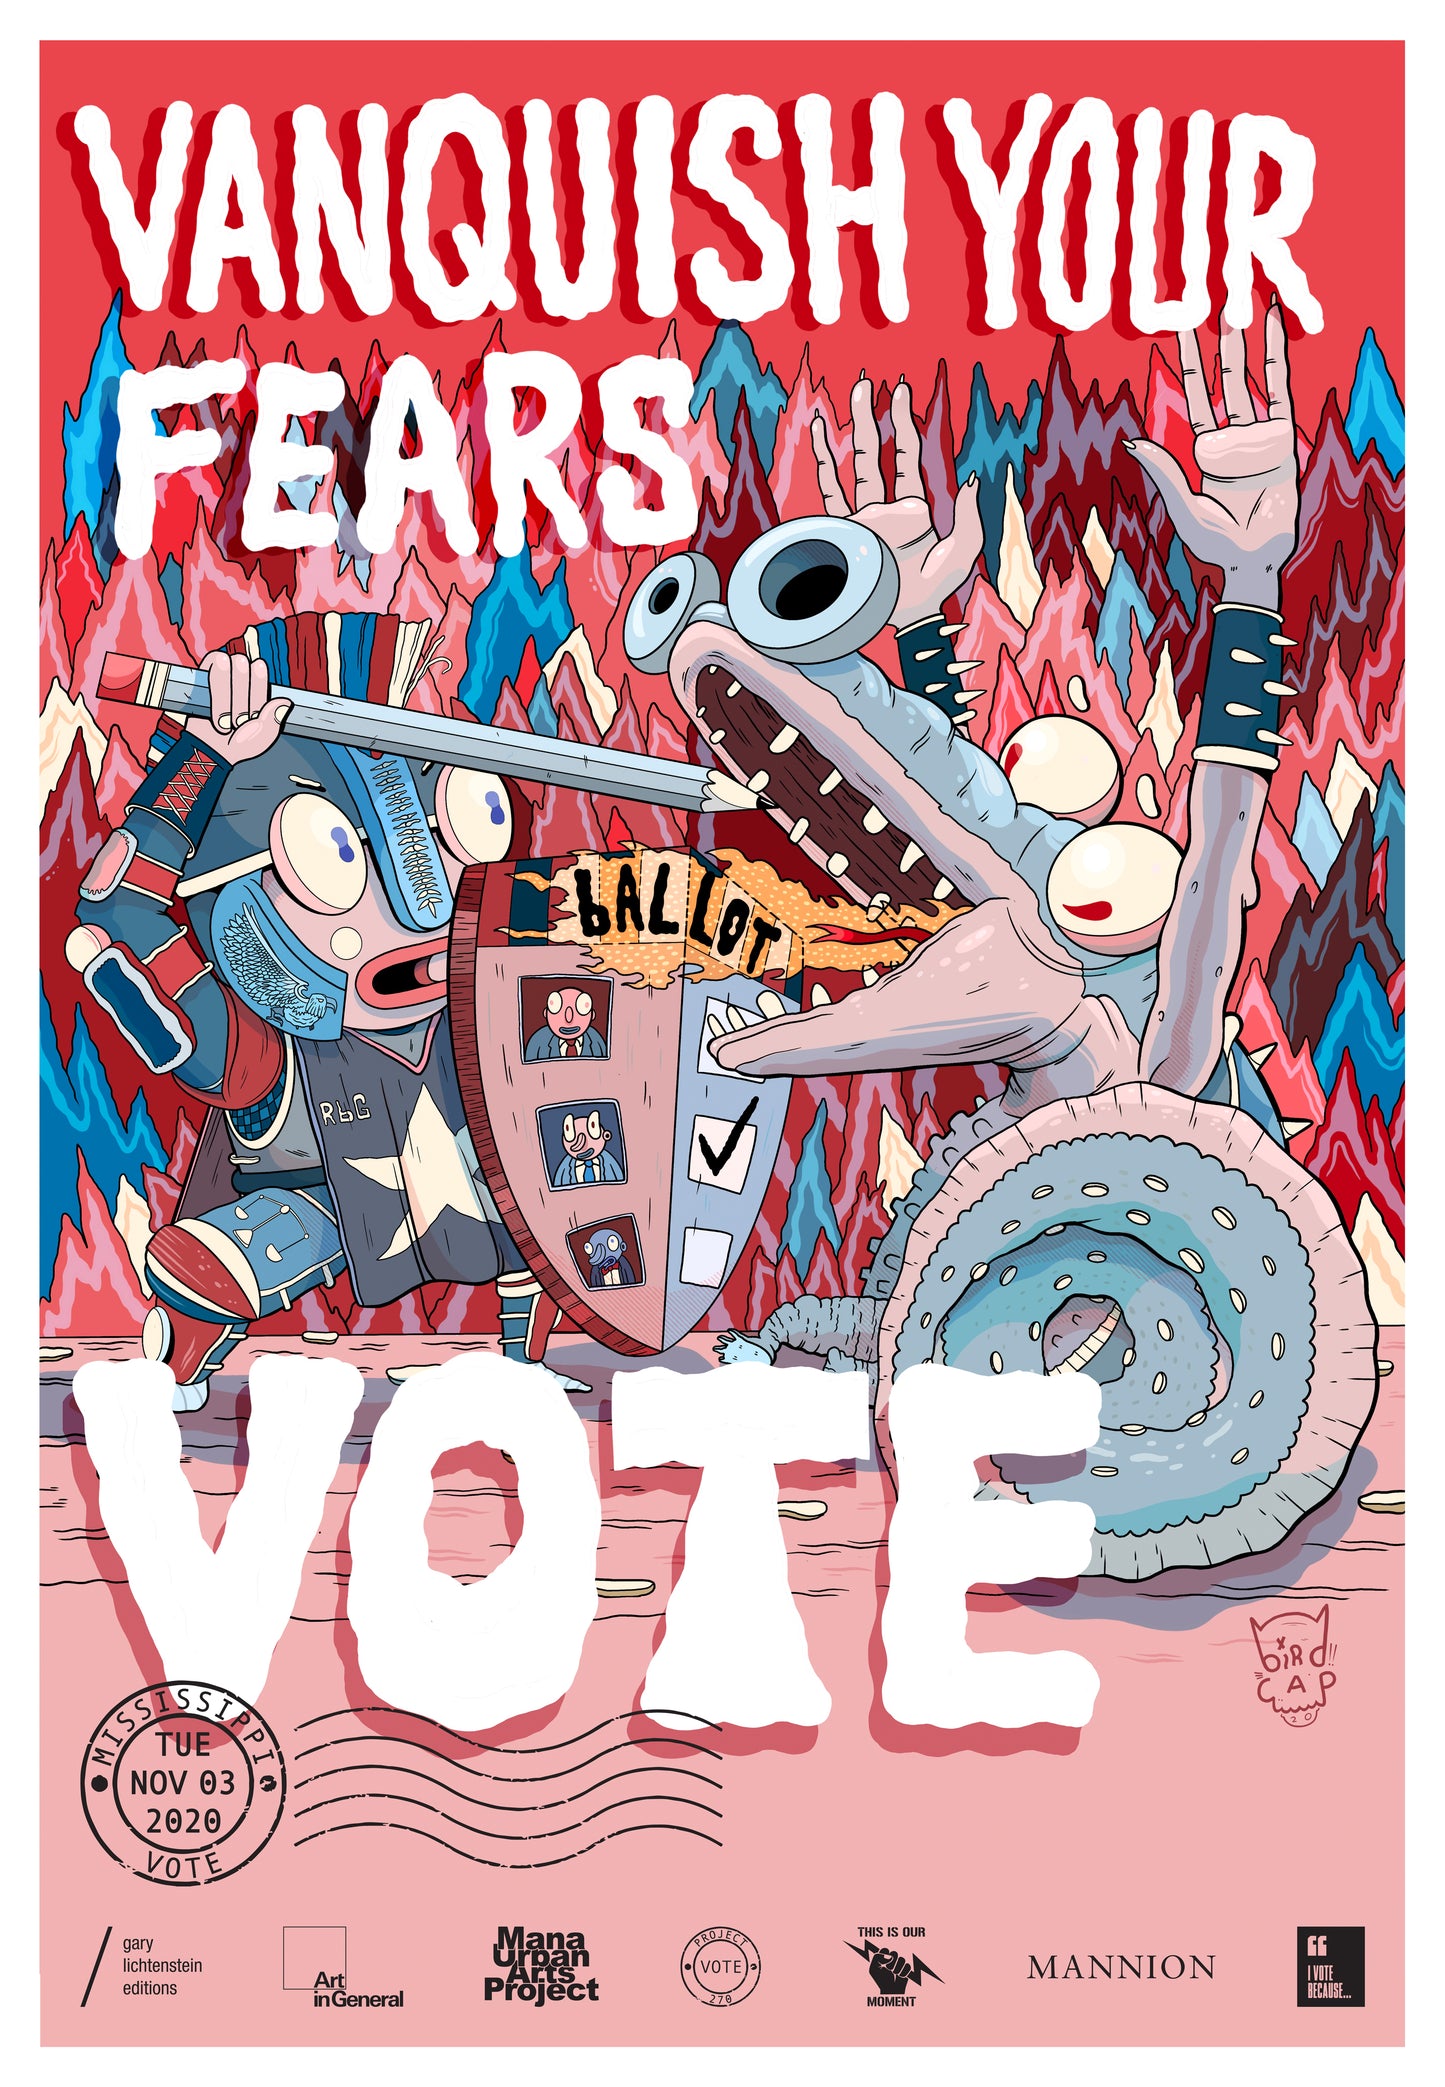 Mississippi Get Out The Vote Poster by Birdcap